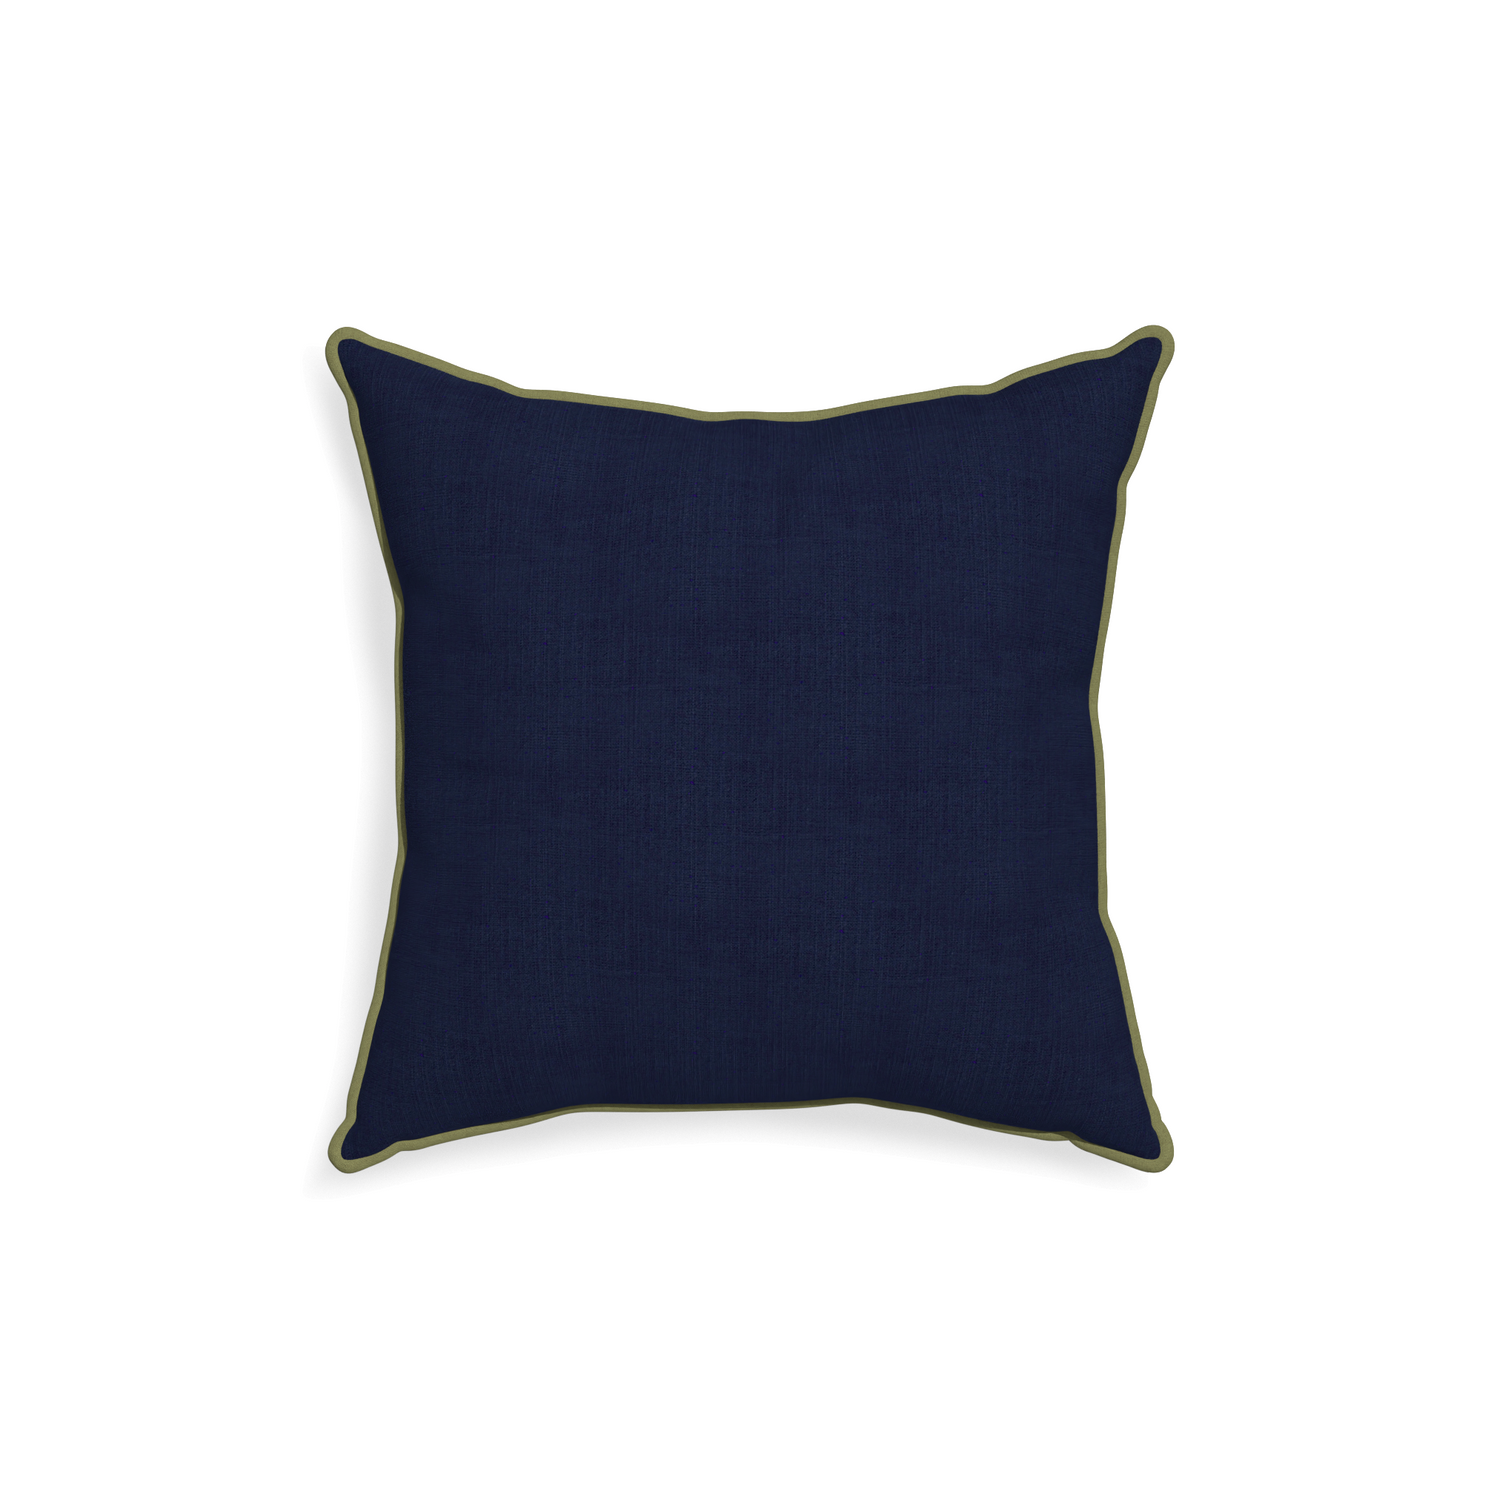 square navy blue pillow with moss green piping 